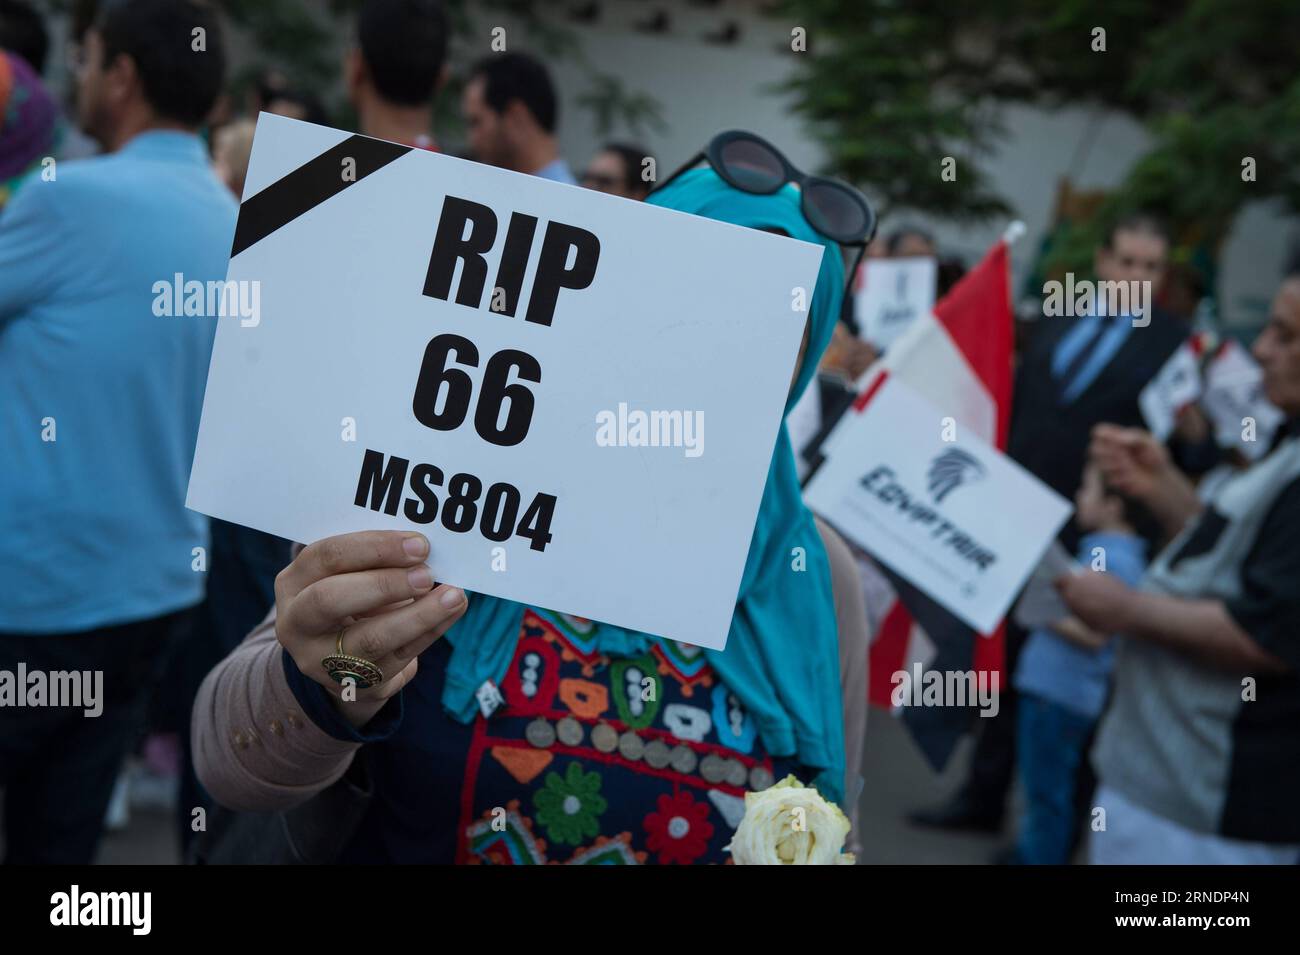 EgyptAir-Maschine abgestürzt: Trauermarsch in Kairo (160526) -- CAIRO, May 26, 2016 -- A woman holds a banner with the words Rest In Peace while participating in a march mourning the victims of crashed EgyptAir Flight MS804 plane in Cairo, Egypt, May 26, 2016. A massive candlelight march has been held Thursday evening near the Opera House here in the Egyptian capital city over the recent EgyptAir plane crash with the participation of senior officials including the Egyptian aviation minister and the French ambassador to Cairo. ) EGYPT-CAIRO-CRASHED PLANE-CANDLELIGHT MARCH MengxTao PUBLICATIONxN Stock Photo